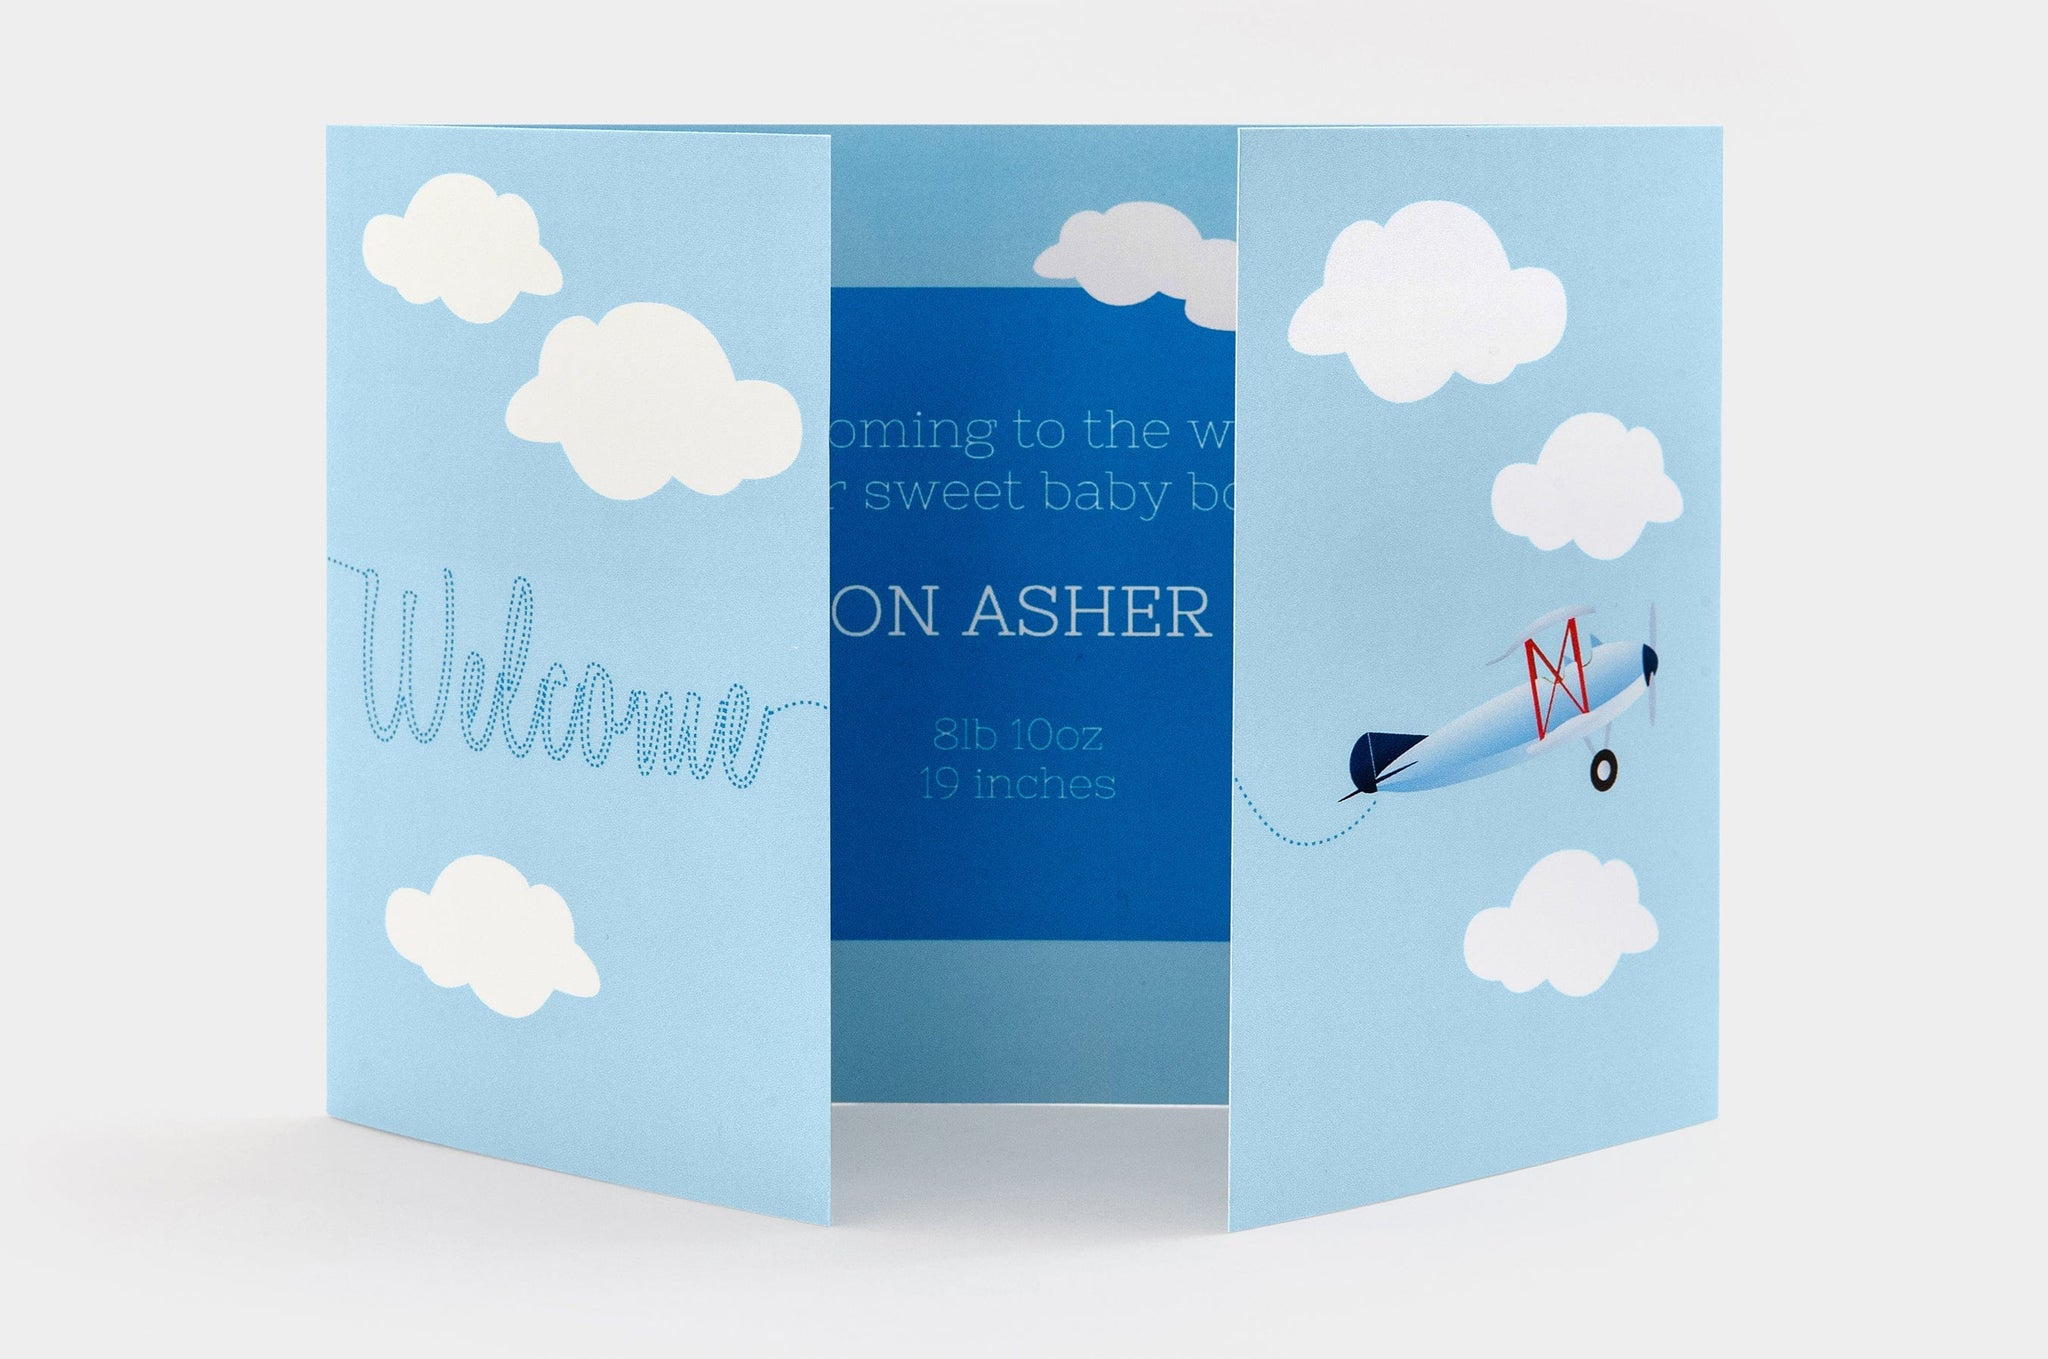 5x7" Gate Fold Card feauturing Welcome baby artworkB